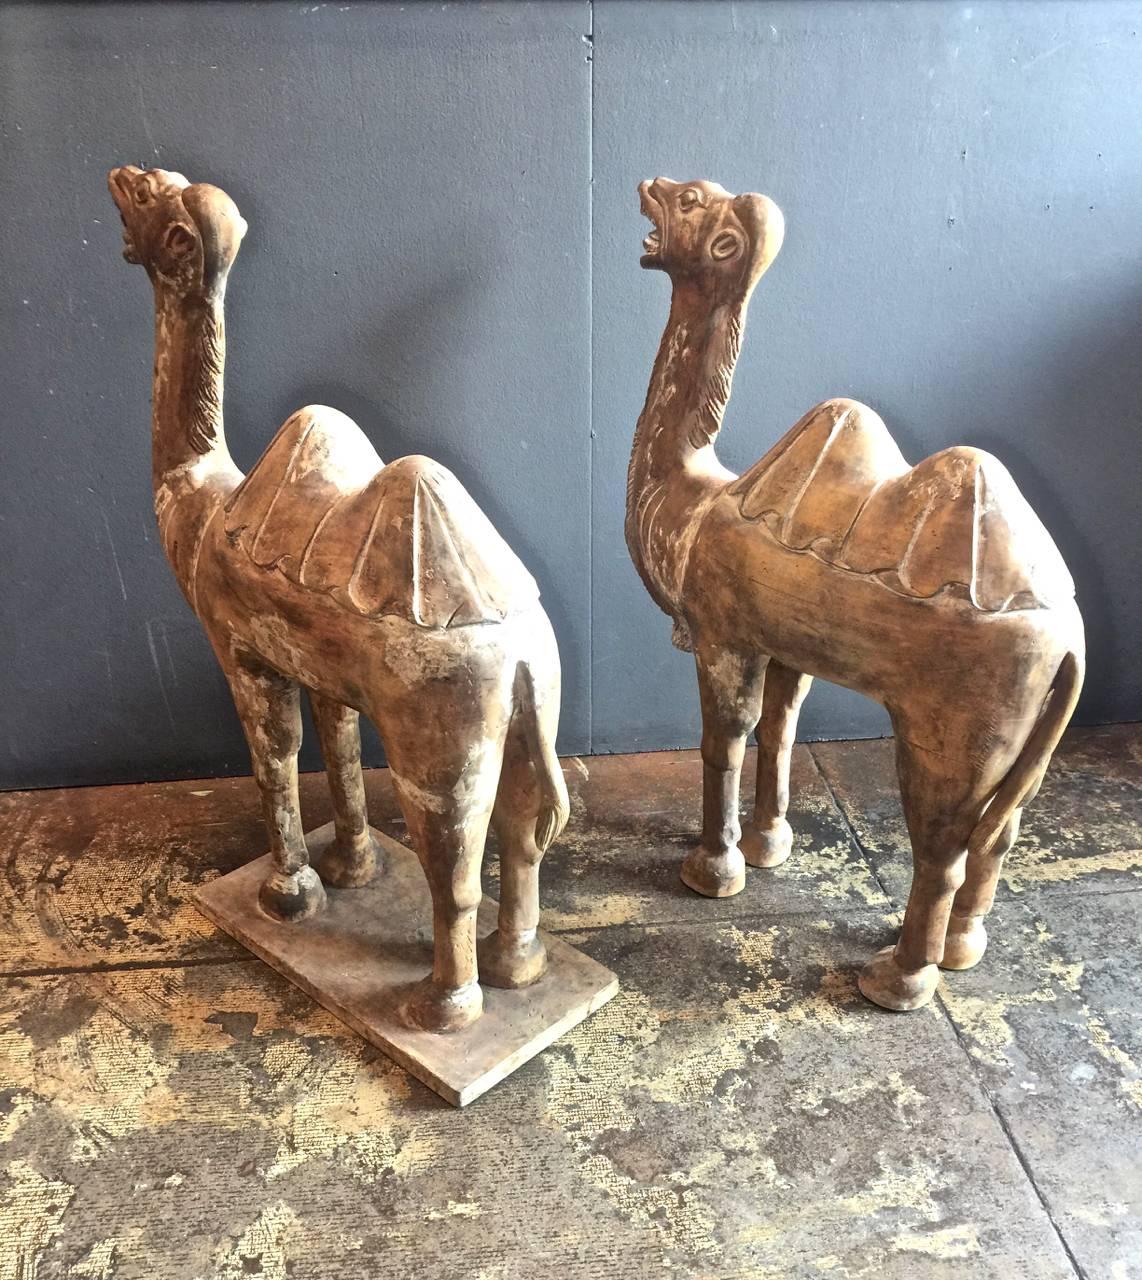 This is a very unusual pair of large antique Chinese carved wood bactrian camels. The camels date to the 19th century and are in the Tang dynasty style. The camels retain their beautiful natural patina--showing lots of character. One is fitted to a